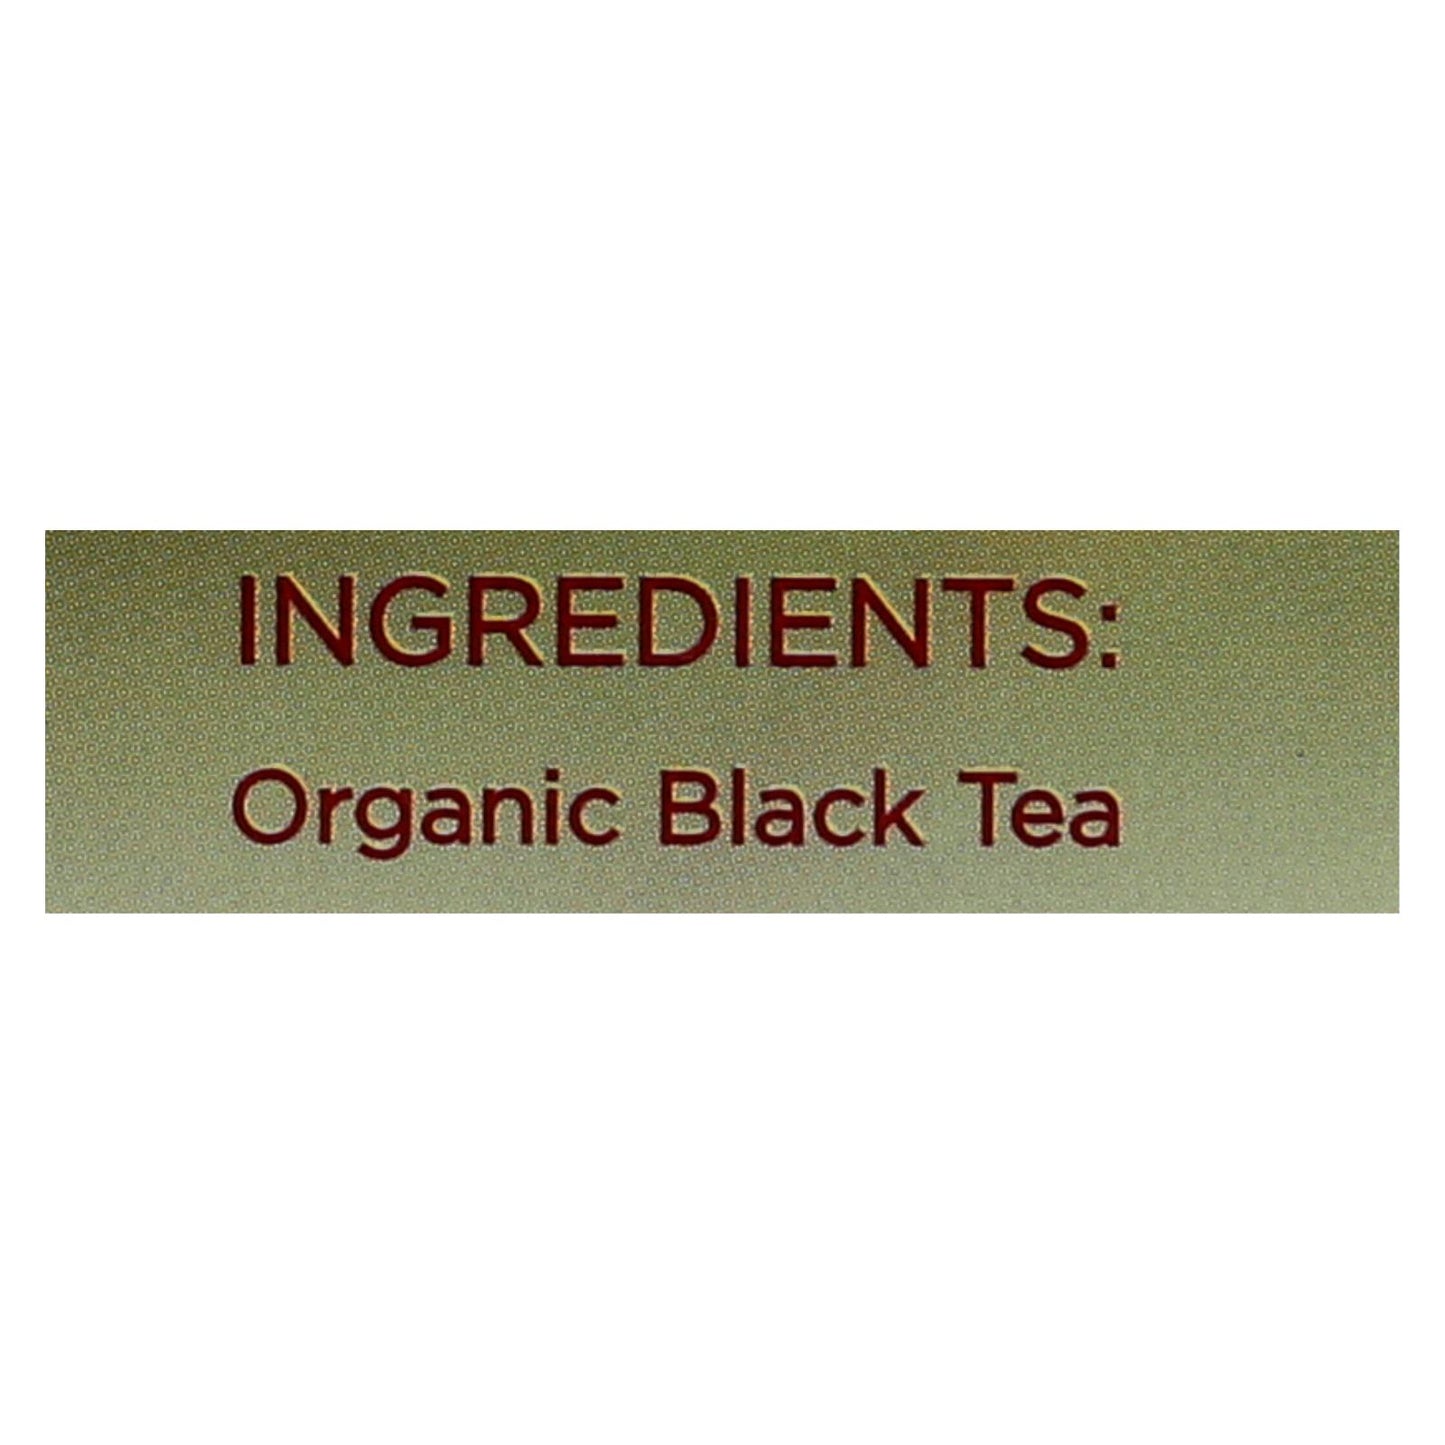 Two Leaves And A Bud Black Tea - Organic Assam - Case Of 6 - 15 Bags